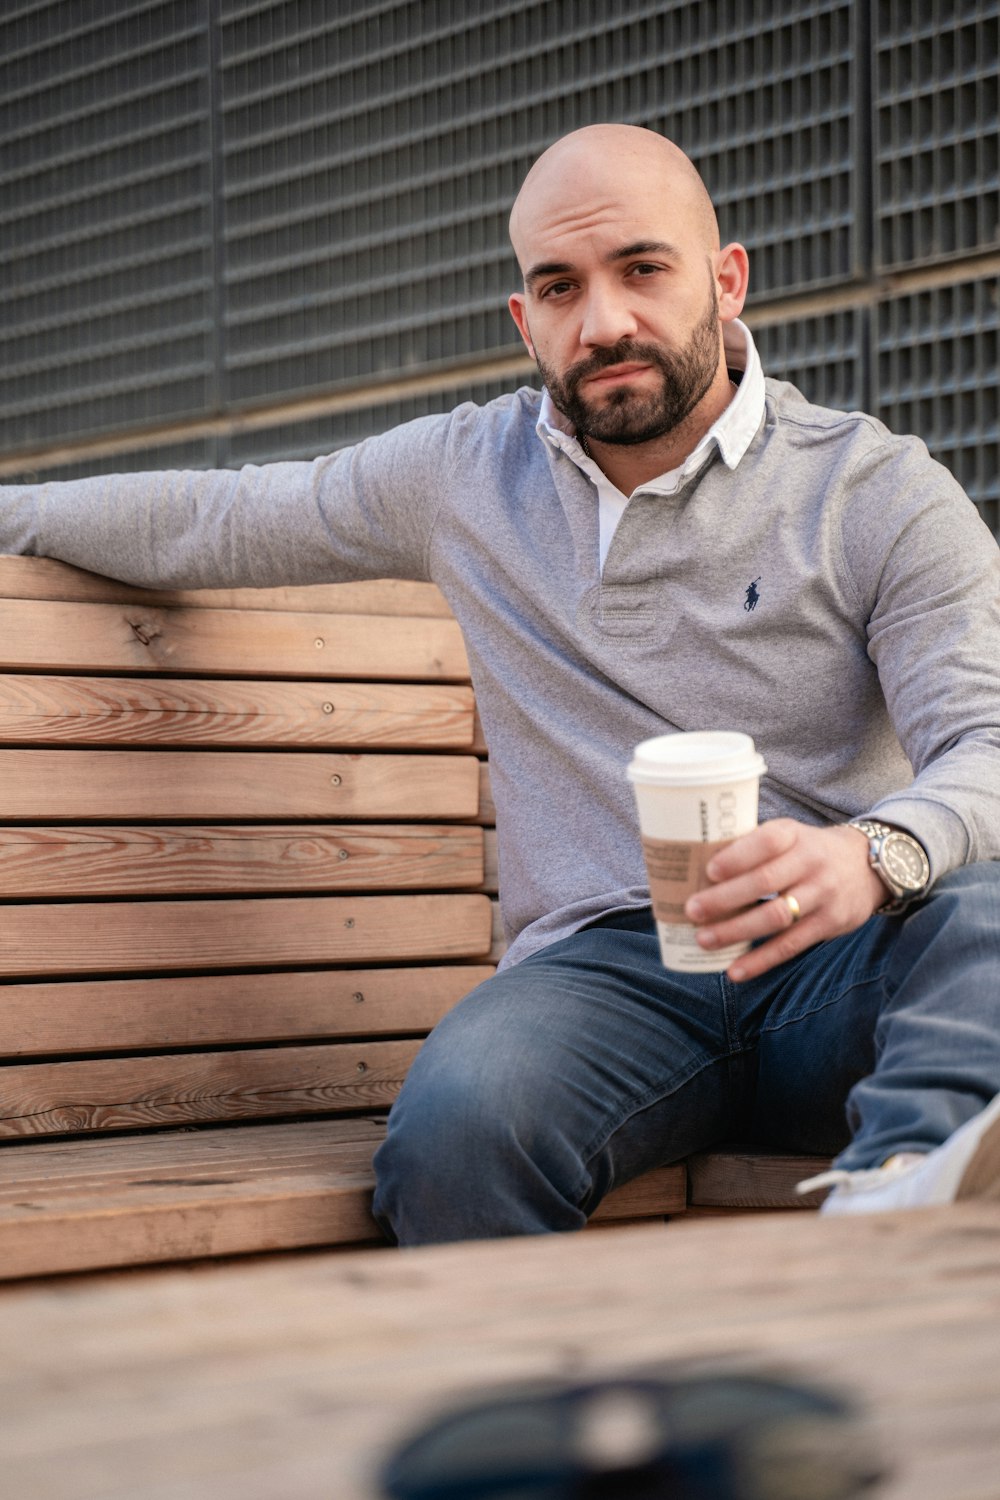 a man sitting on a wooden bench holding a cup of coffee